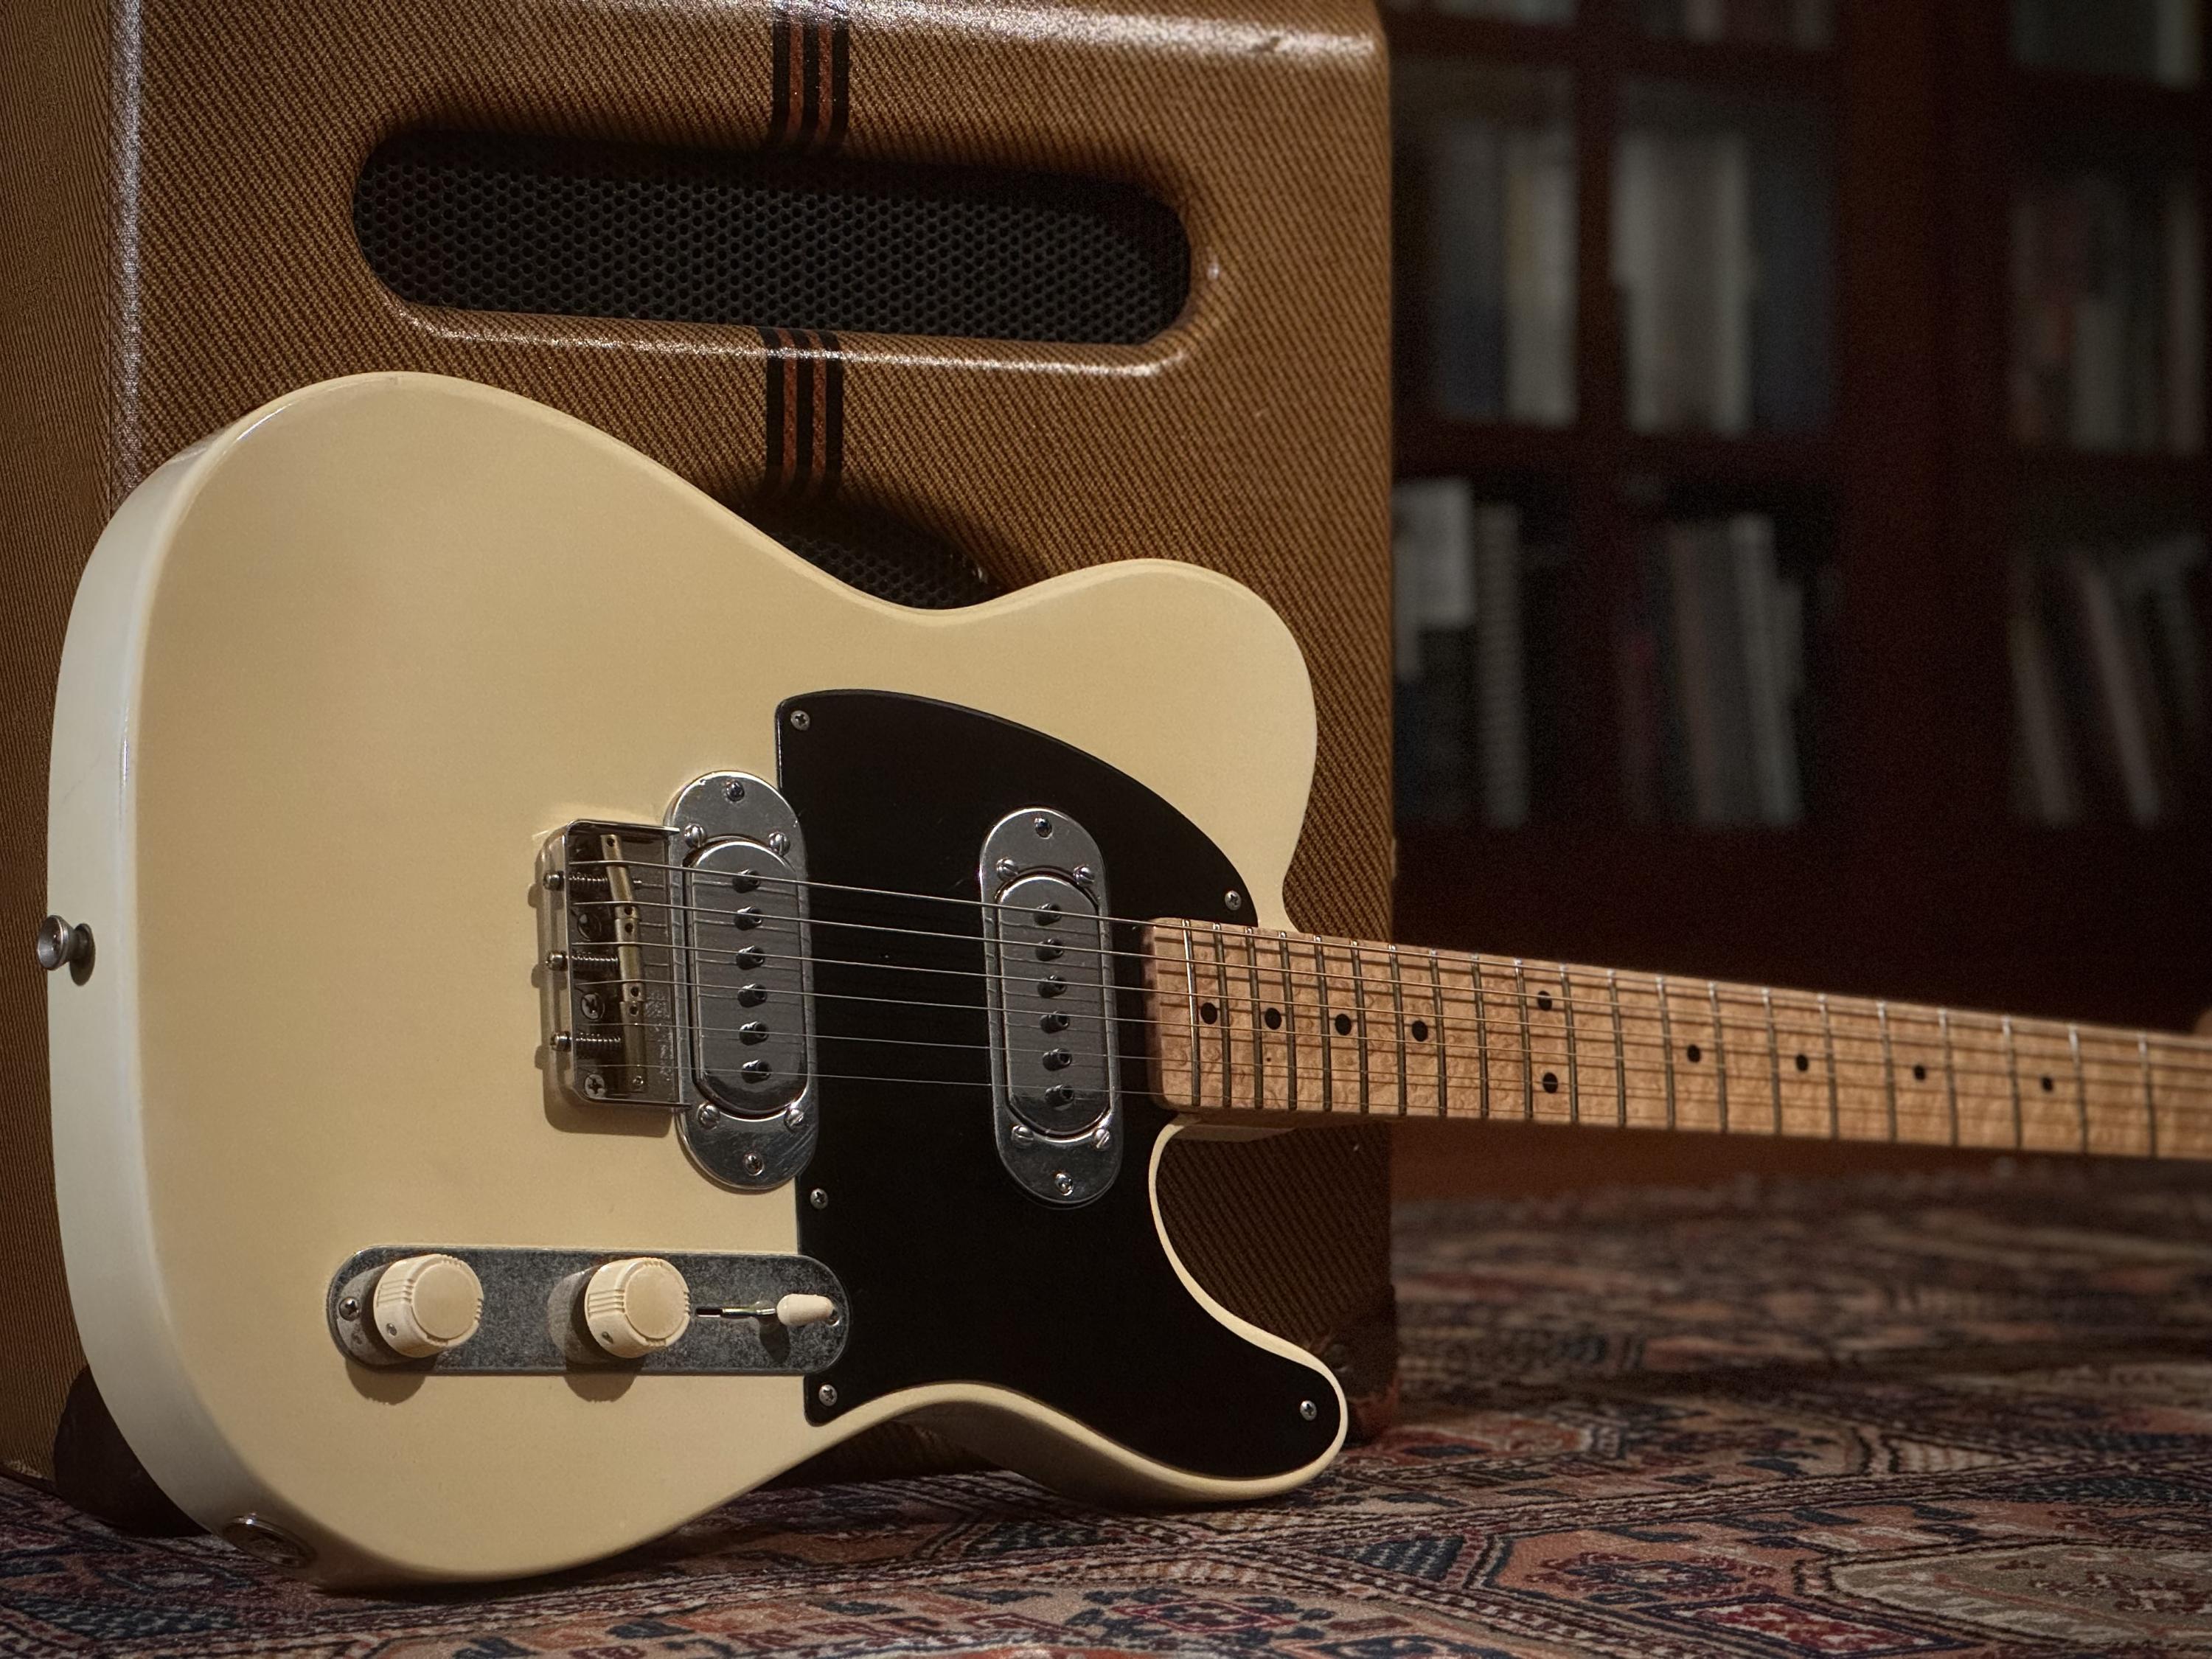 Telecaster Love Thread, No Archtops Allowed-img_9665-jpg